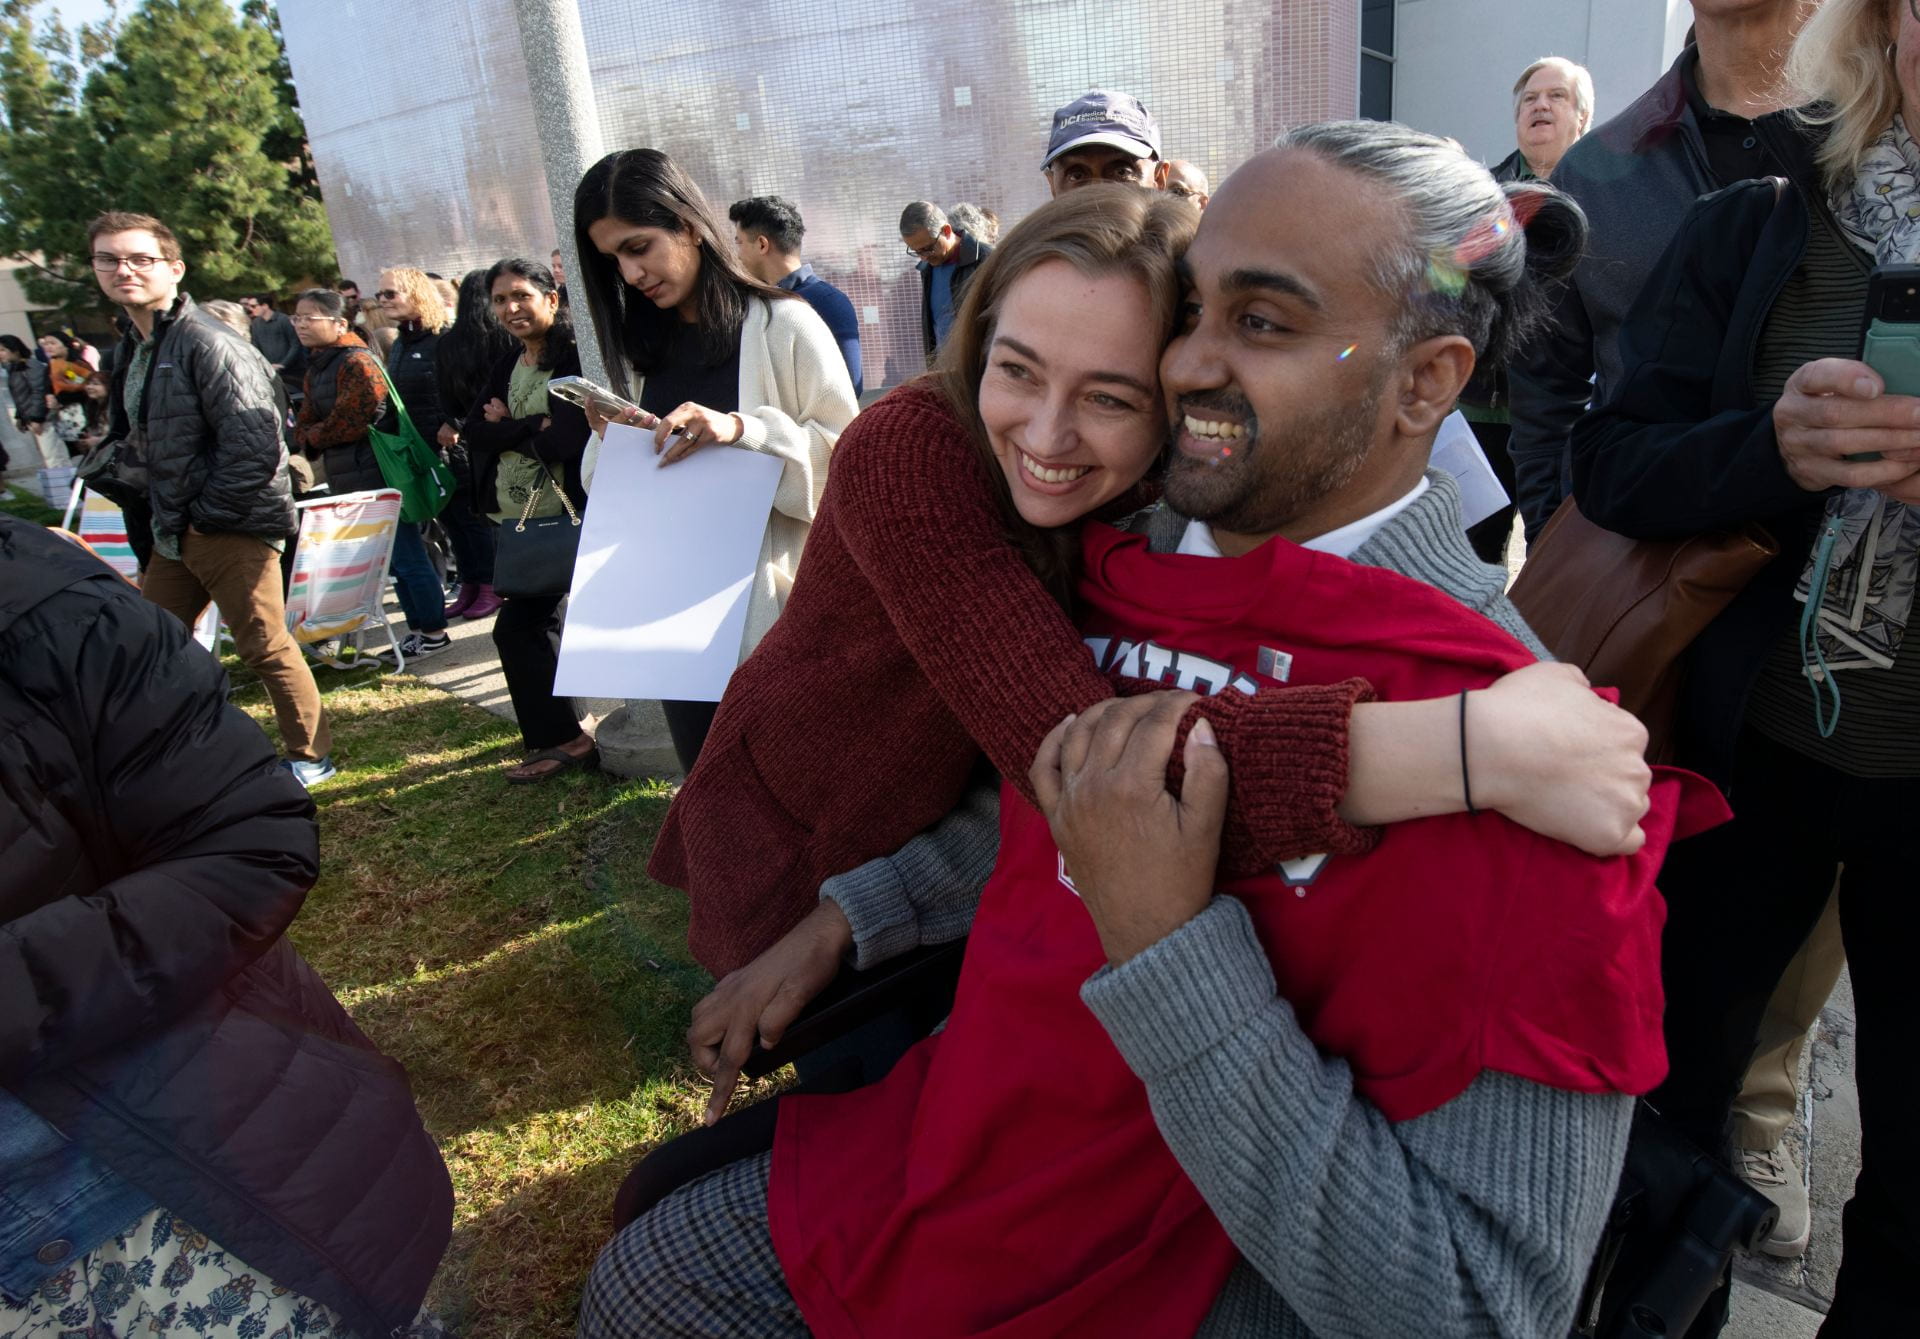 Hinesh Patel (right) gets a congratulatory hug from his wife, Emma Bindloss, after finding out he’ll be going to Stanford University for a radiology and nuclear medicine residency.